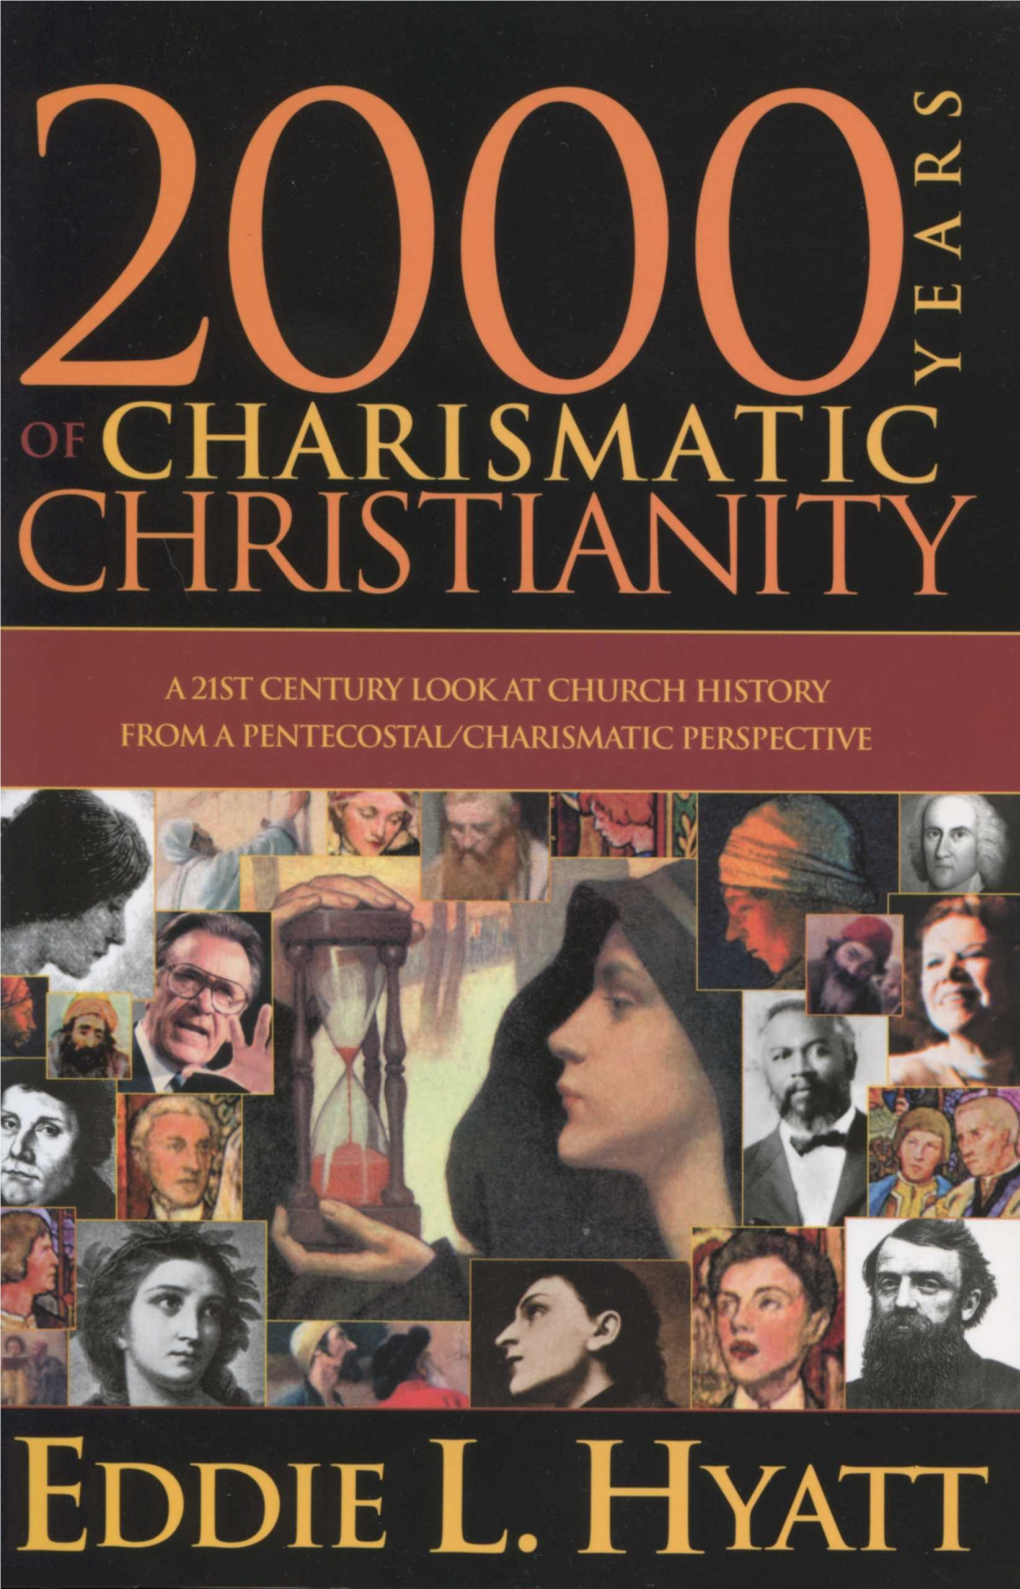 2000 Years of Charismatic Christianity Lays to Rest the Notion That Miraculous Gifts Ceased at Some Point in Time